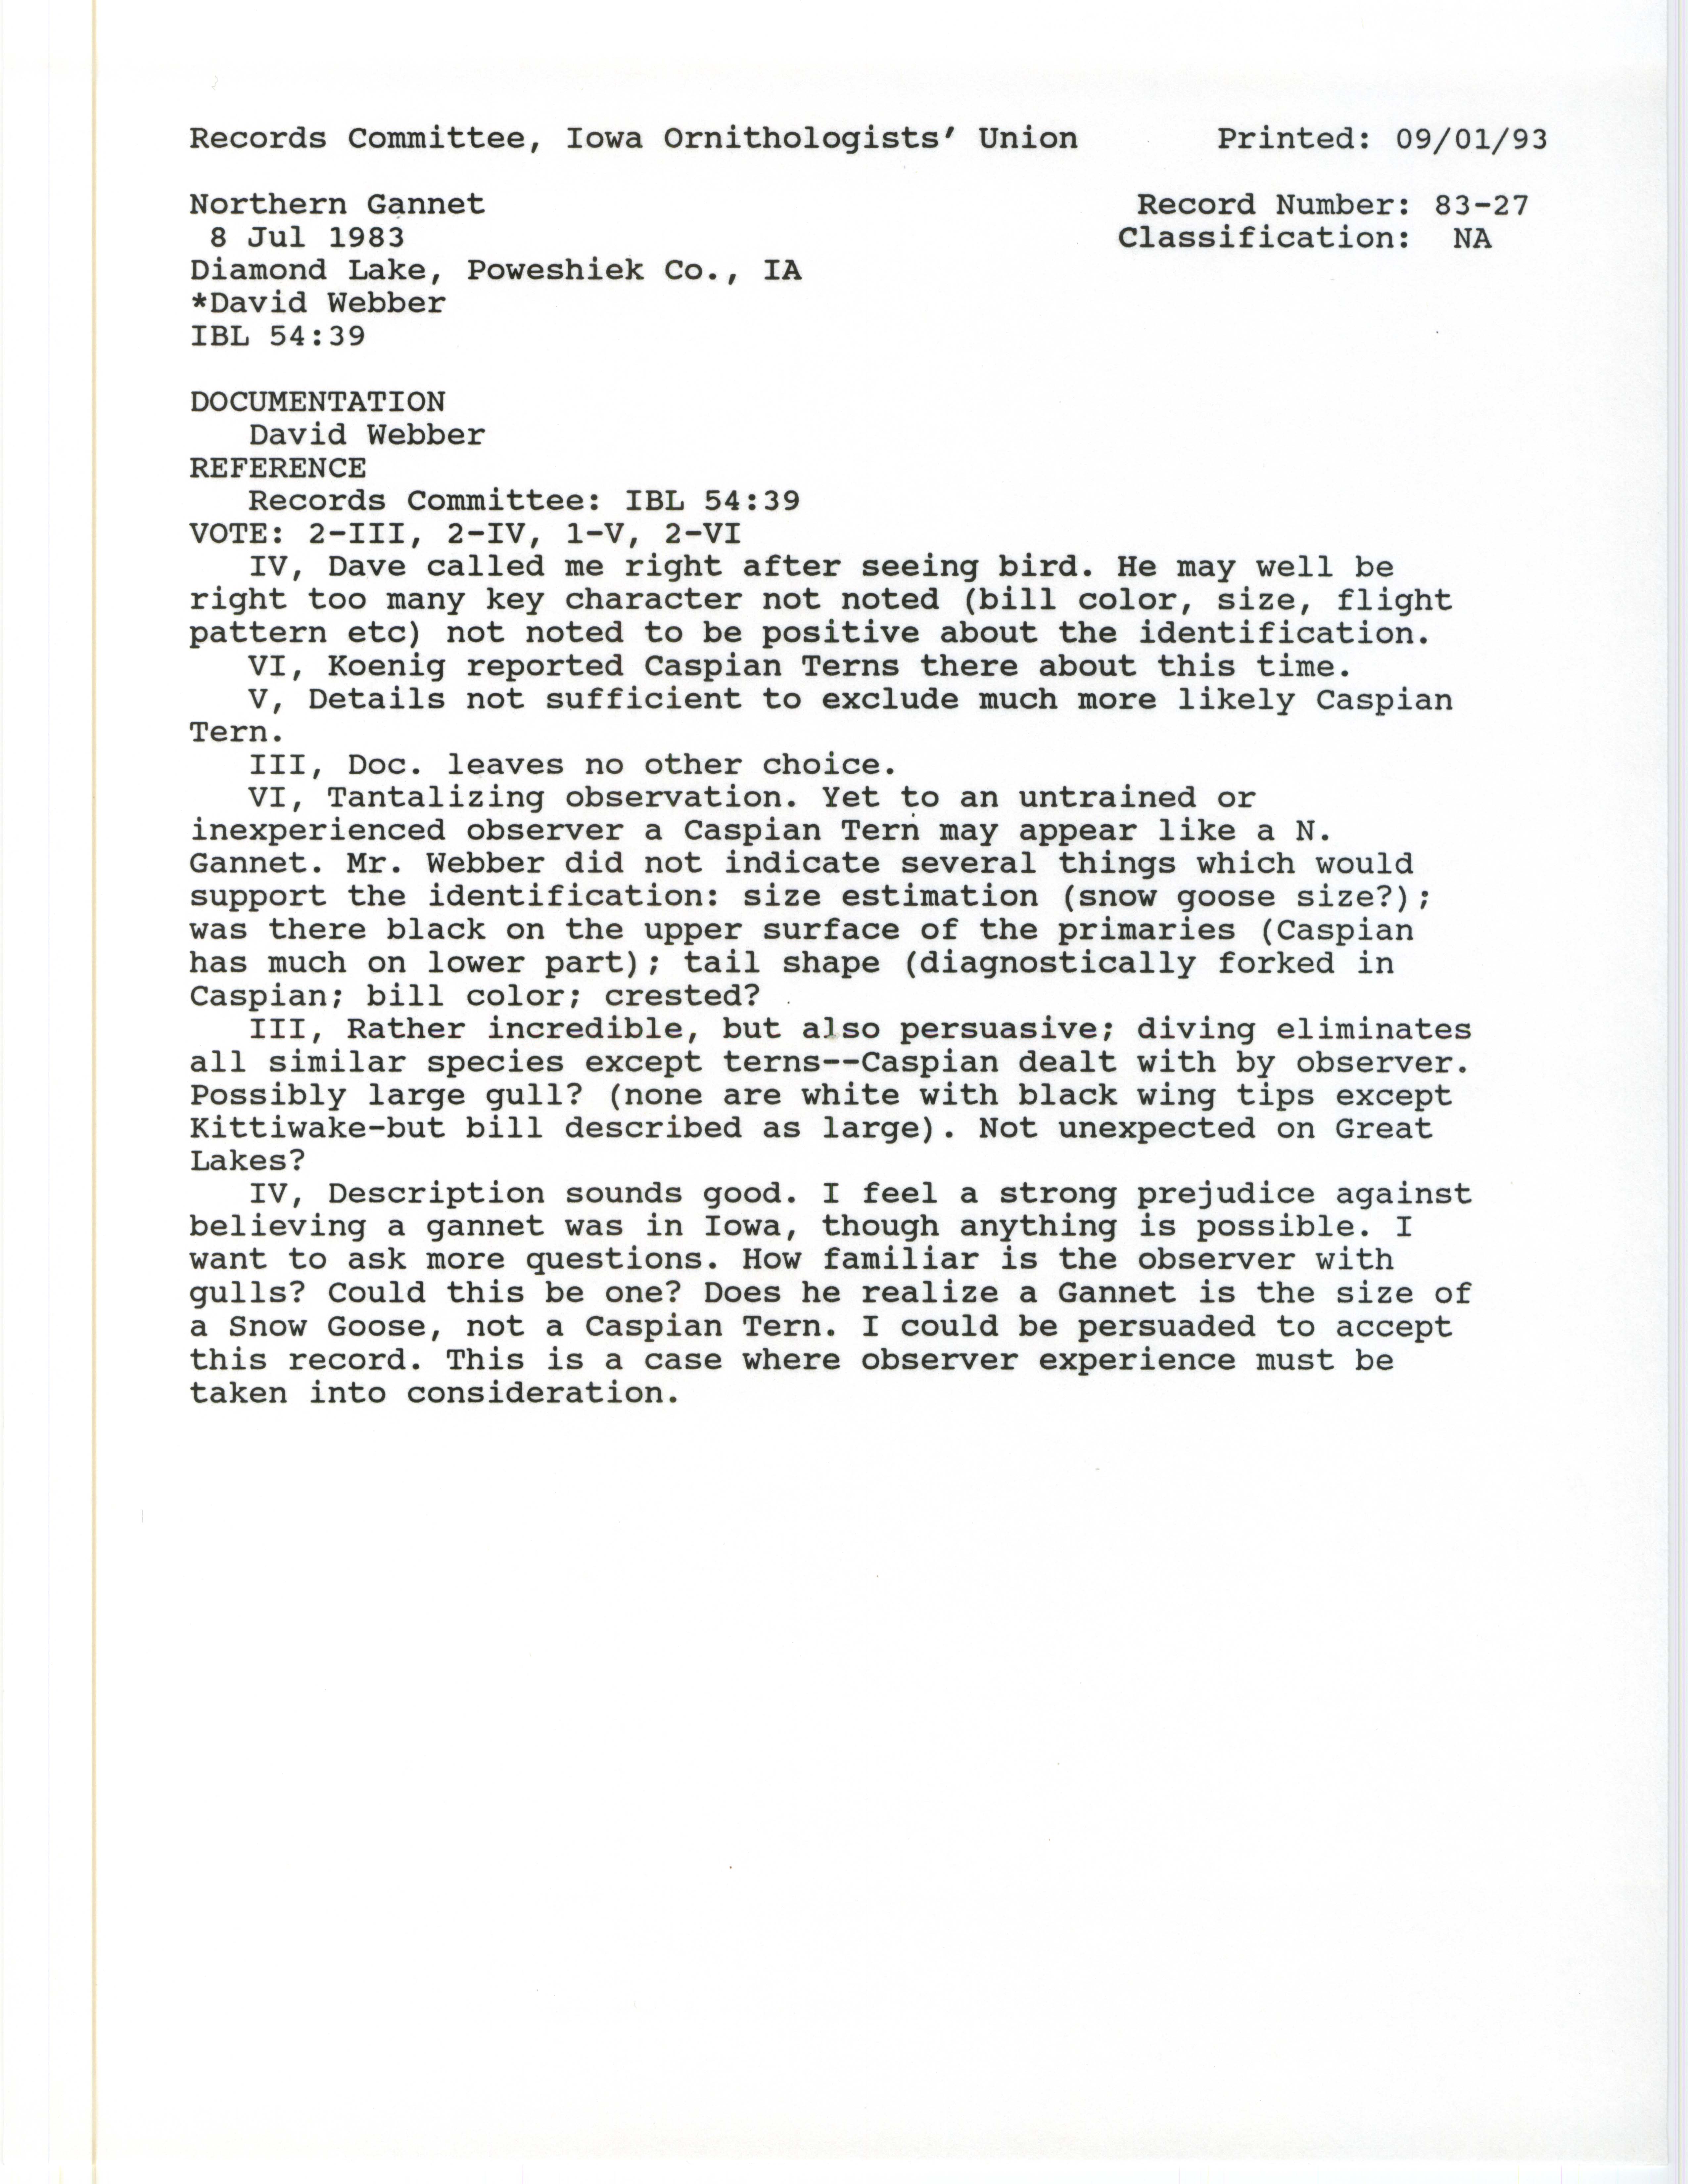 Records Committee review for rare bird sighting of Northern Gannet at Diamond Lake, 1983